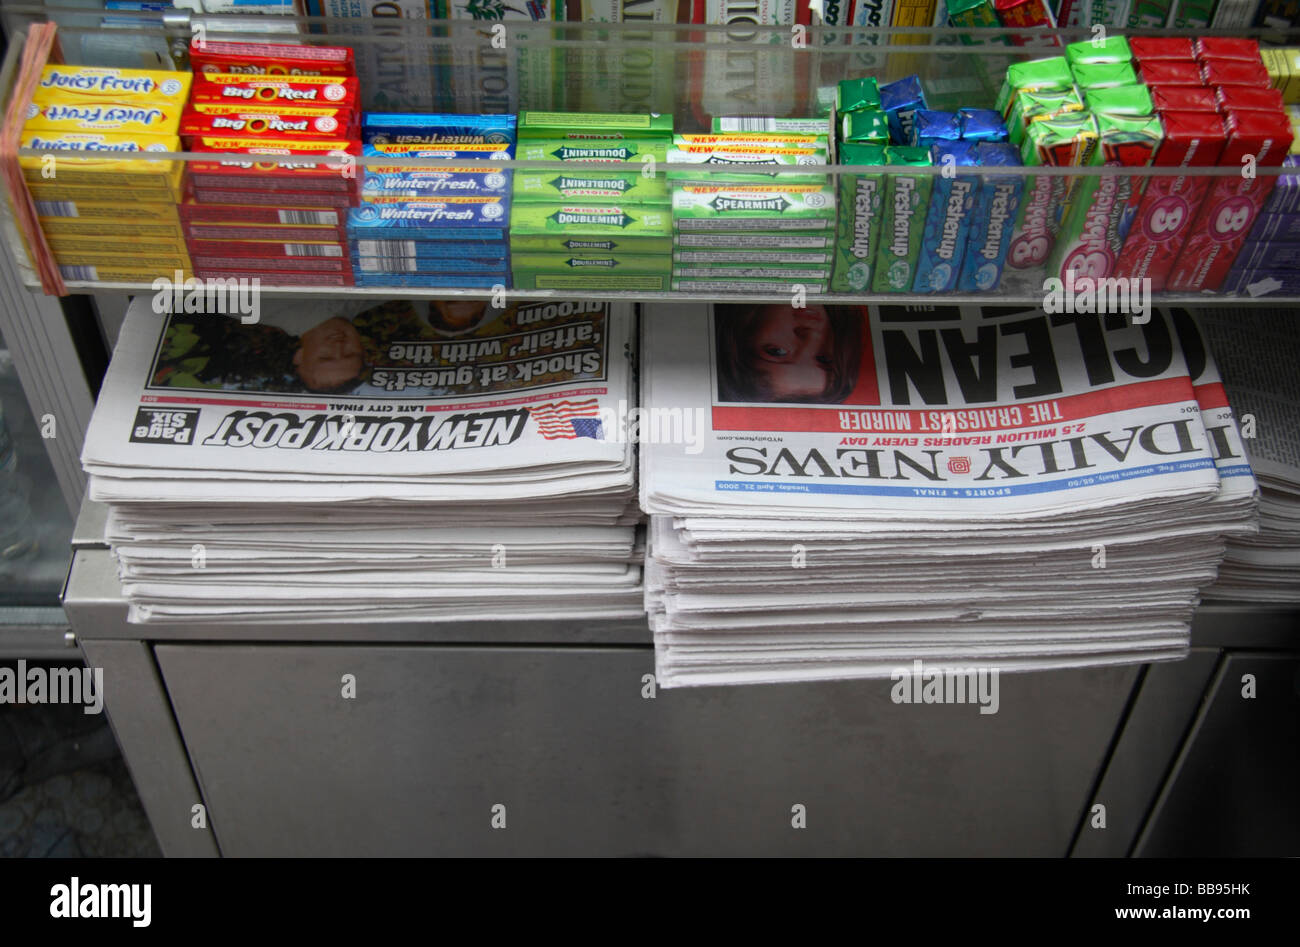 The Daily News and the New York Post newspapers on sale at a New York news stand. Stock Photo